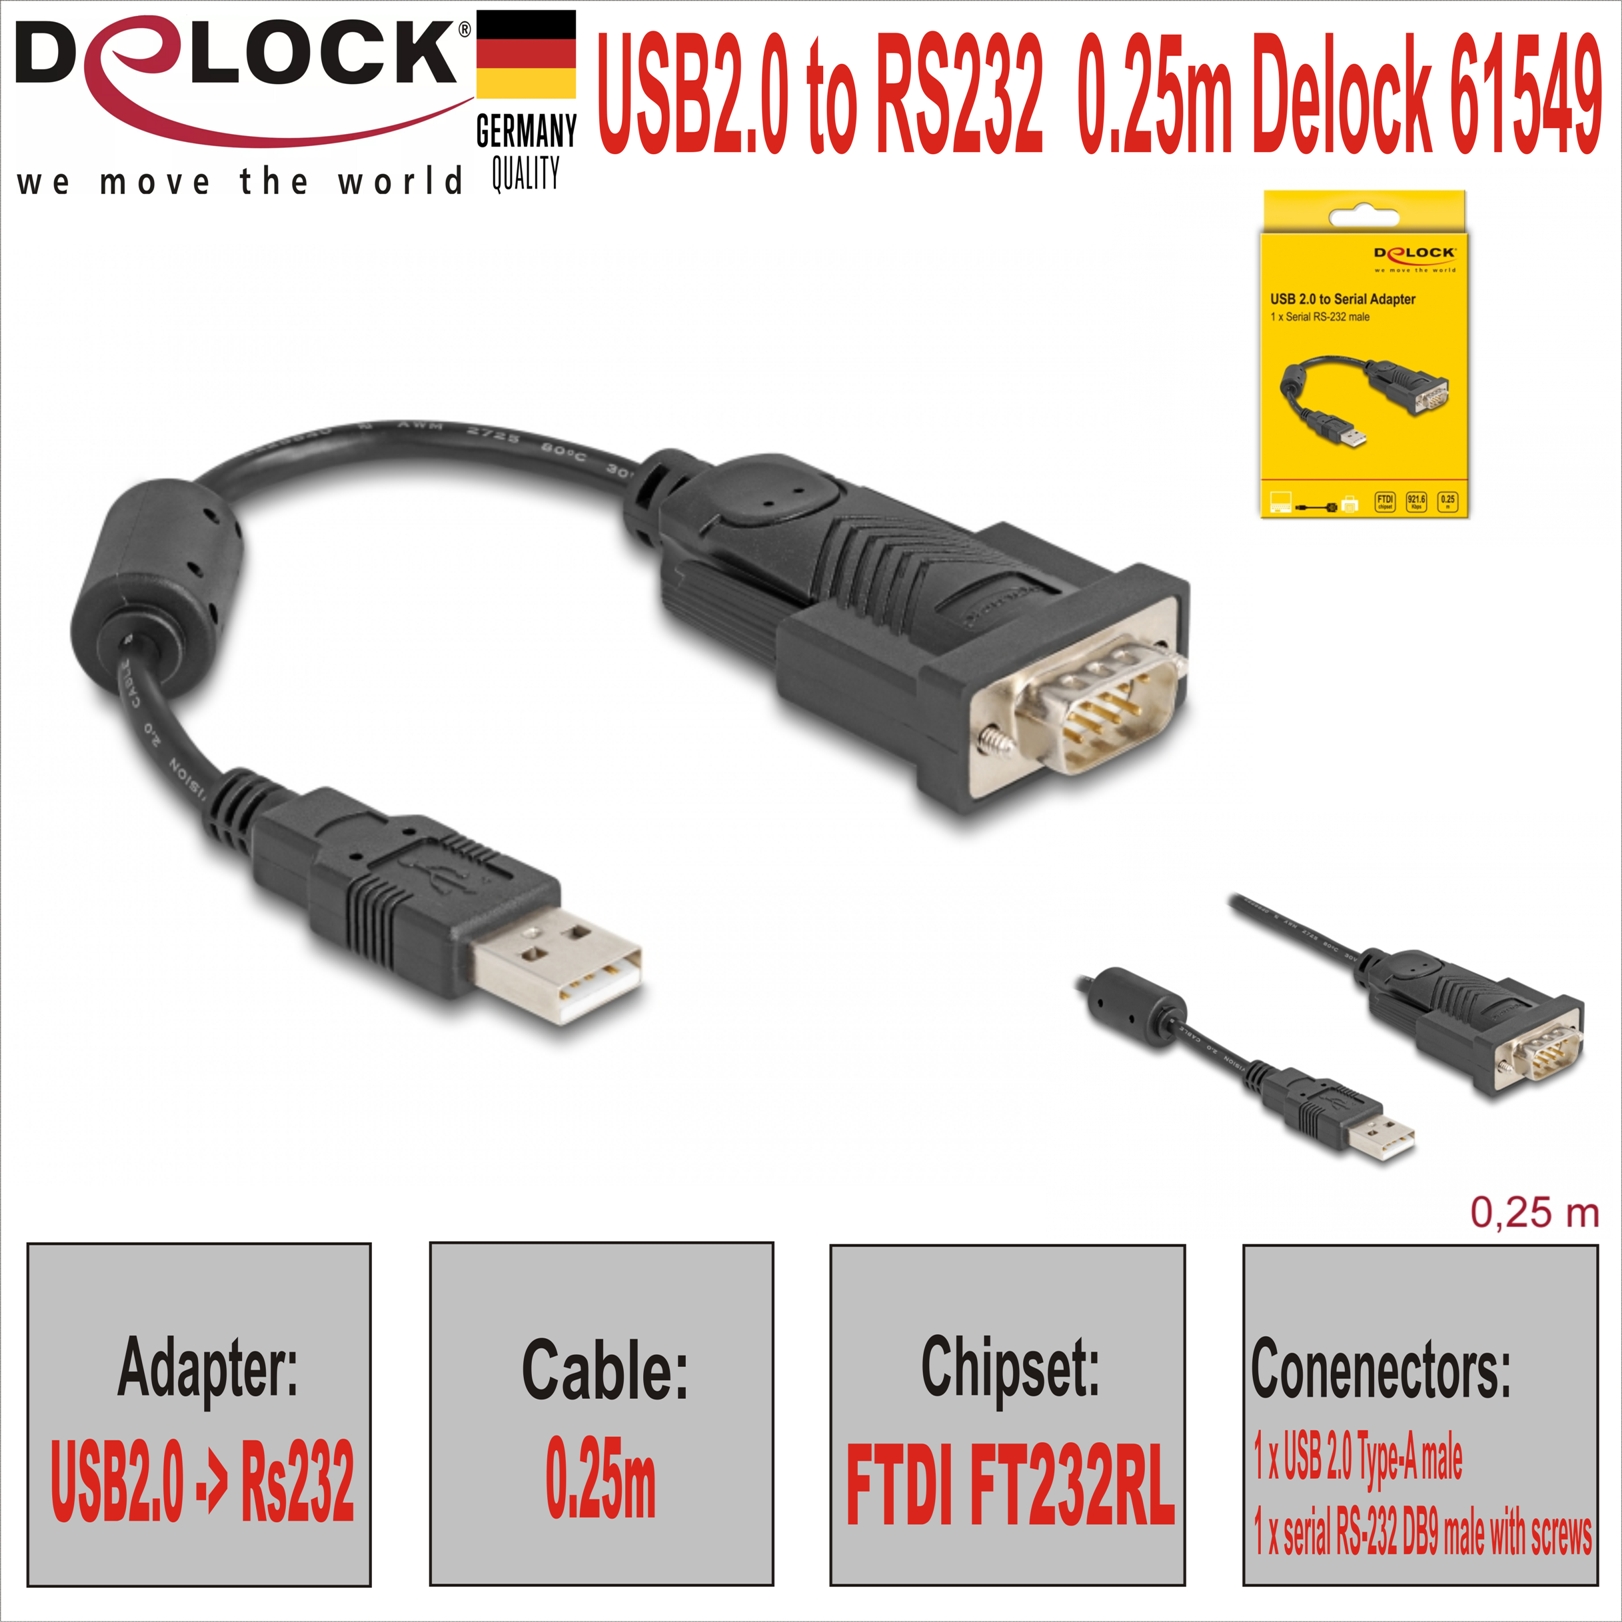 USB2.0 to RS232  0.25m Delock 61549